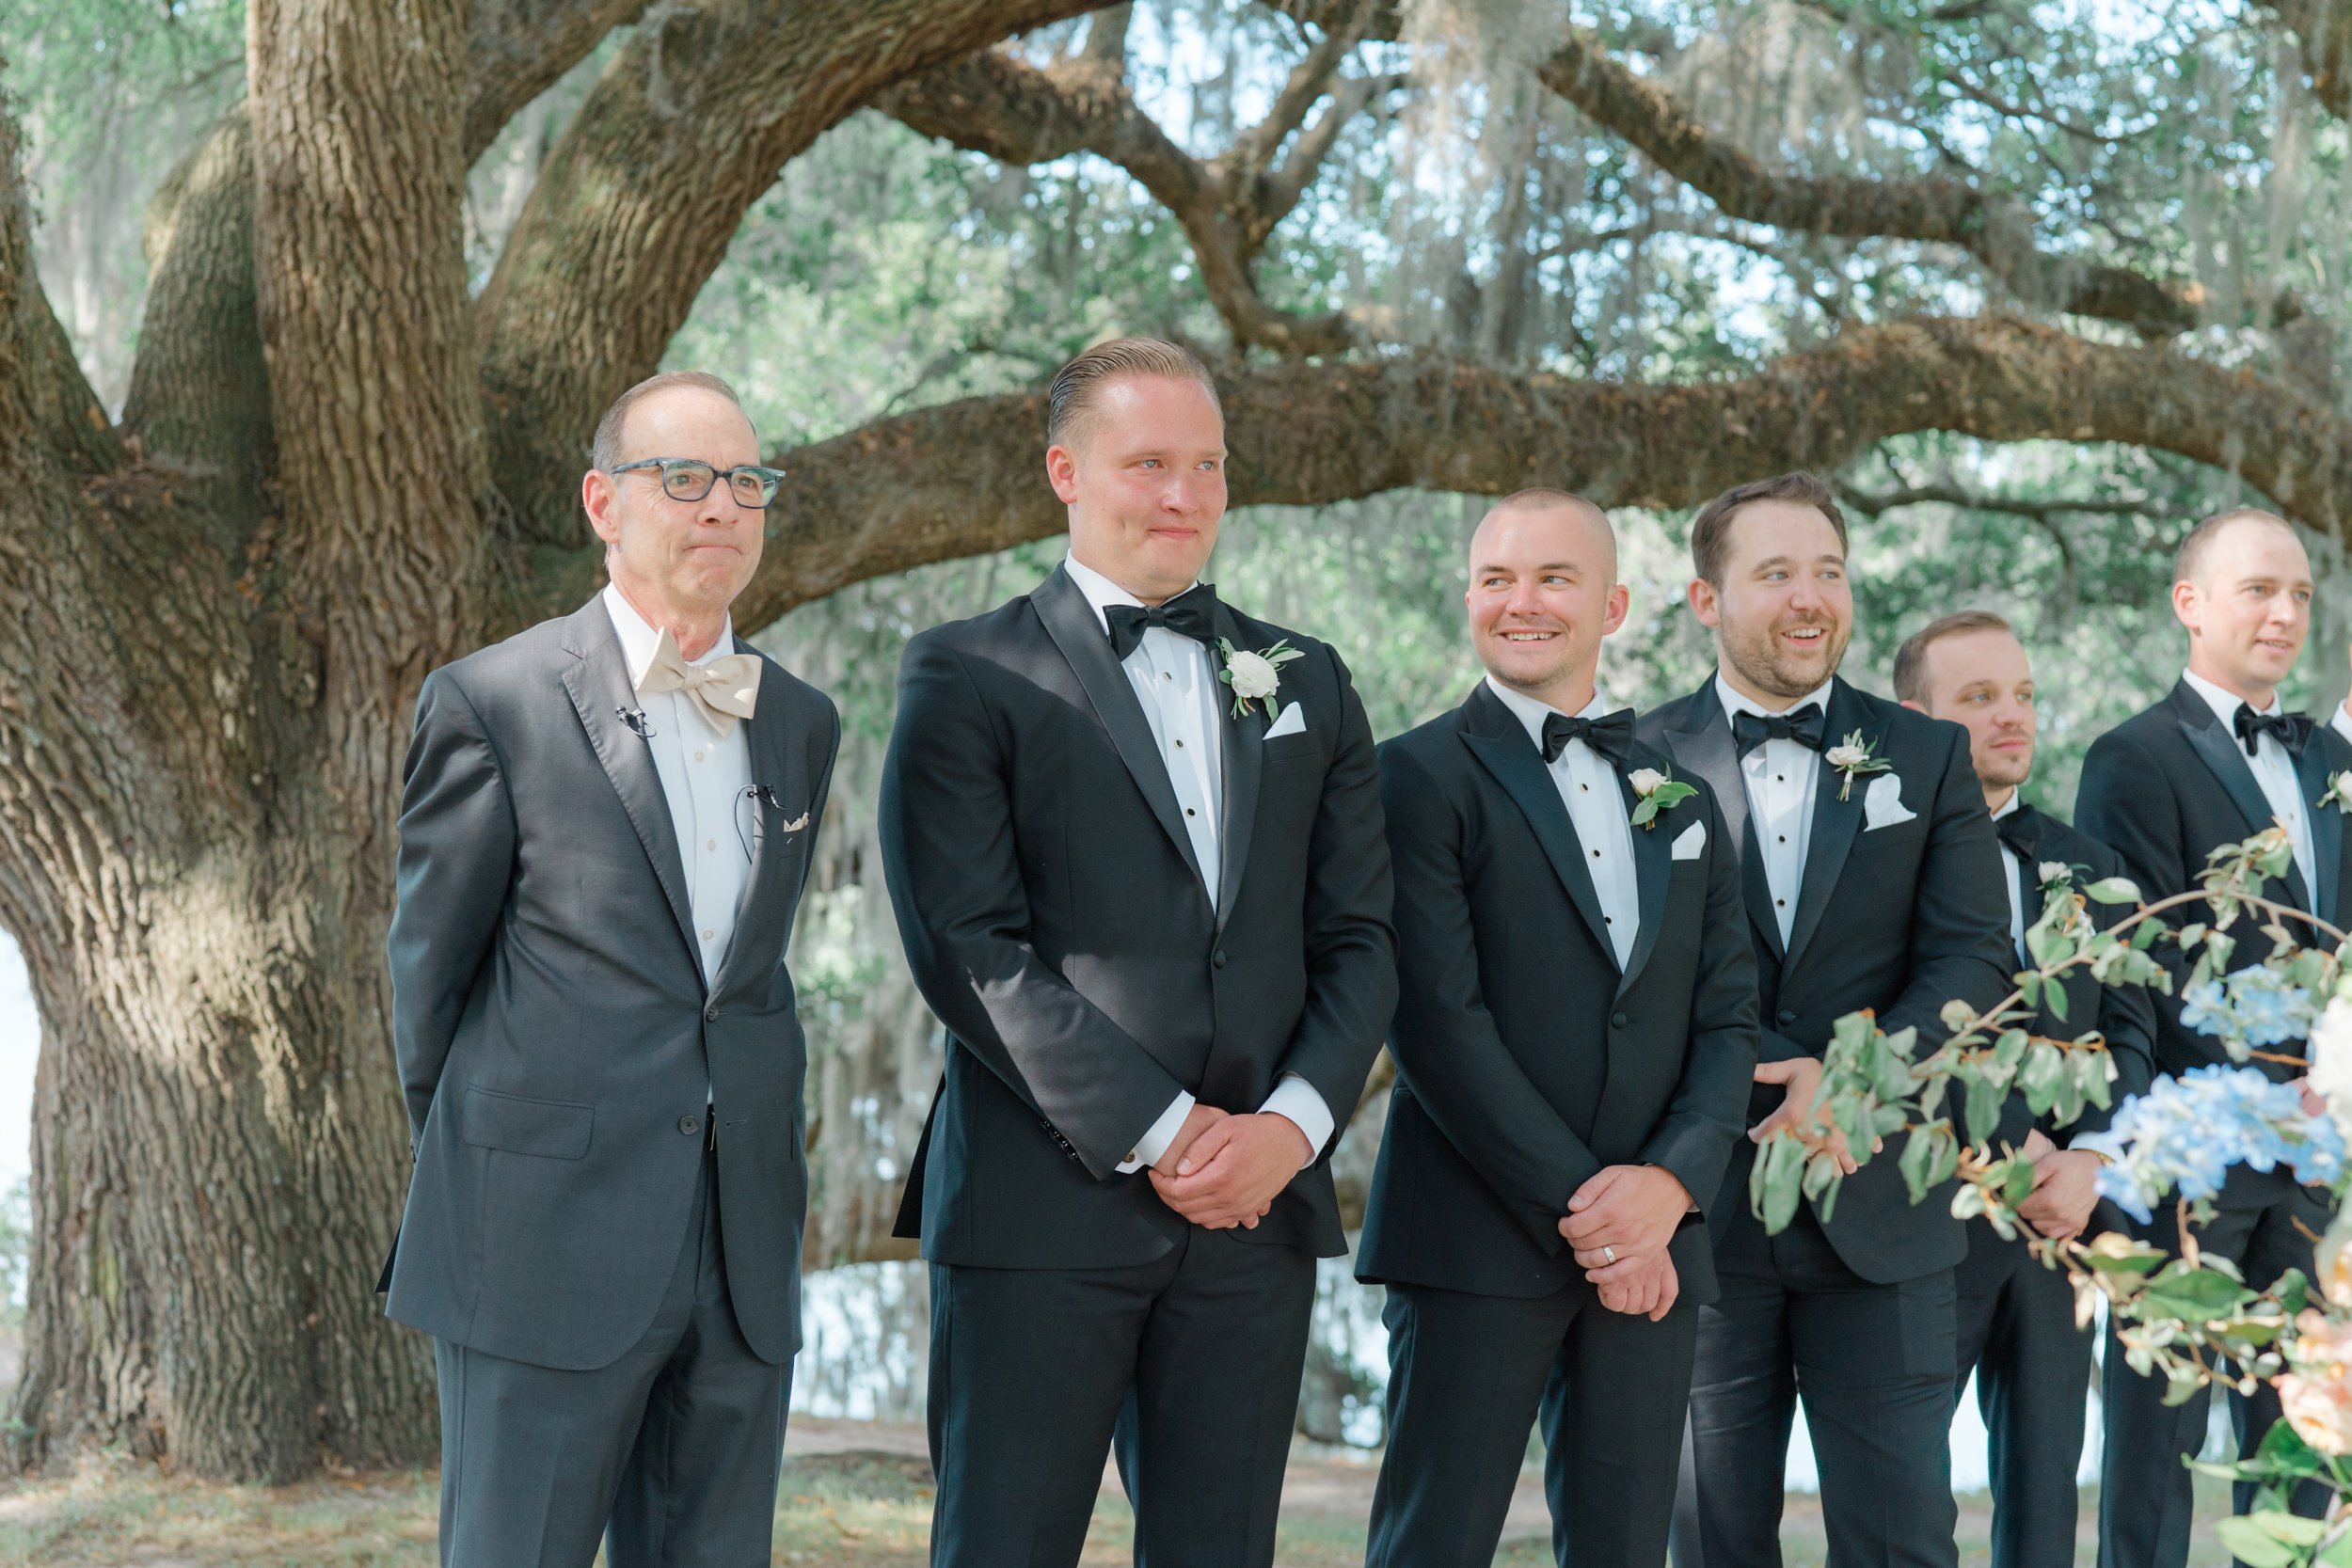 groom and groomsmen wait for bride at wedding ceremony.